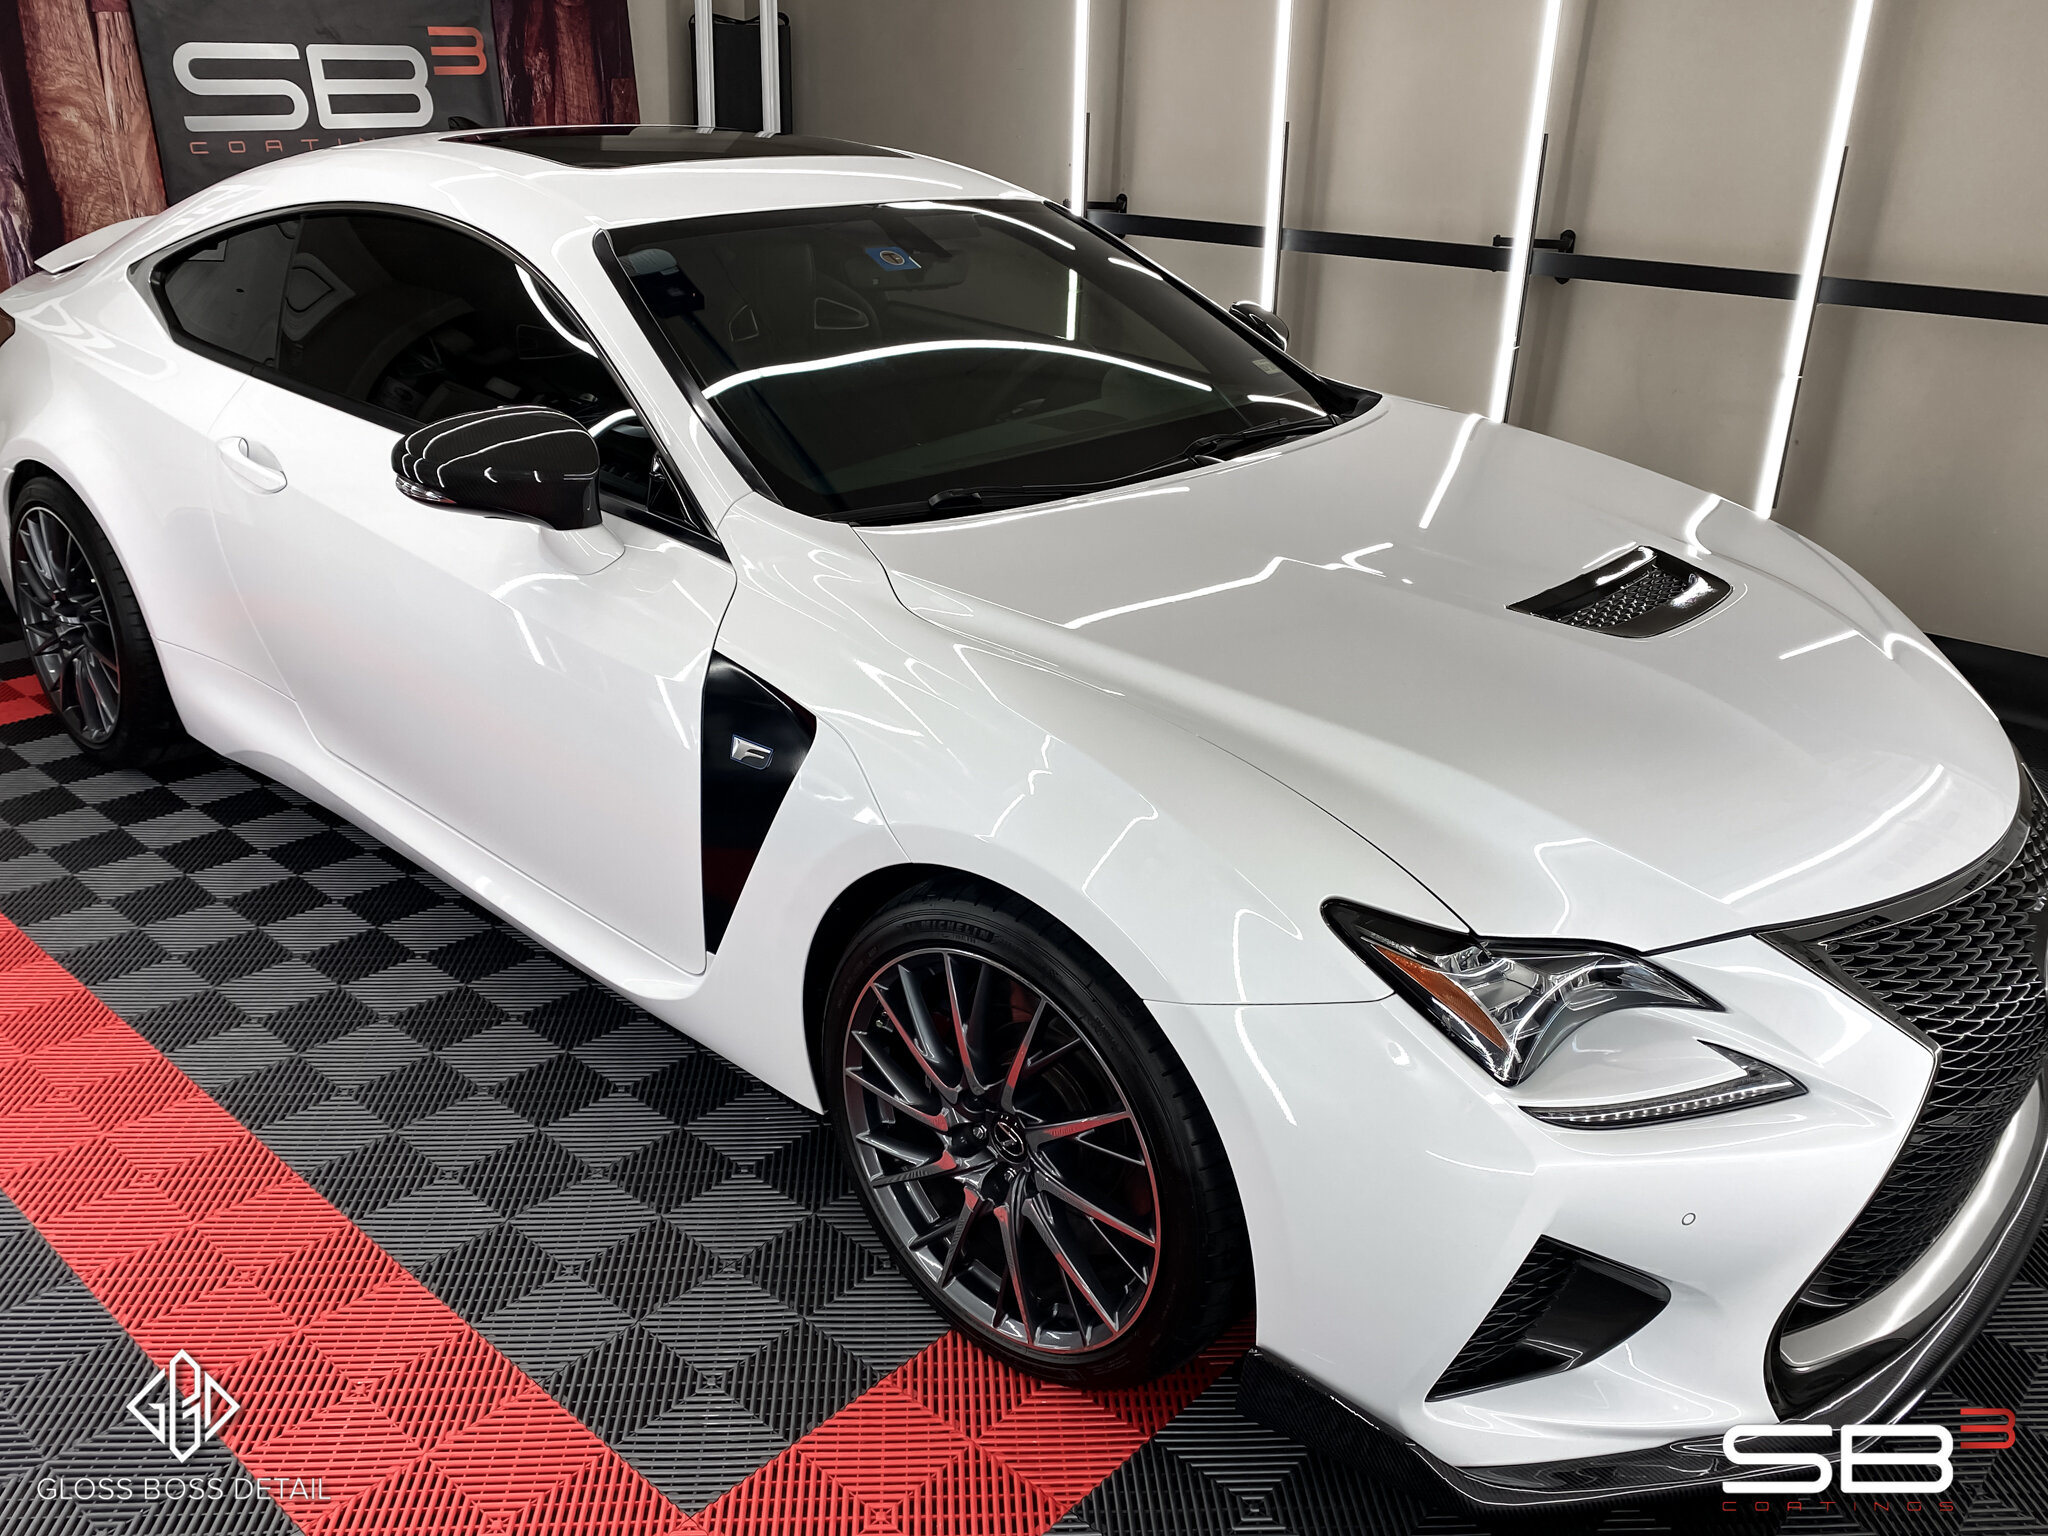 2015 Lexus RC F Sport
Paint Correction

This RC F Sport came to us in need of Stage 2 Machine Polish and Gloss Enhancement after vinyl removal. The roof and spoiler had received the worst damage with heavy scuffs. There were also remaining bits of vi